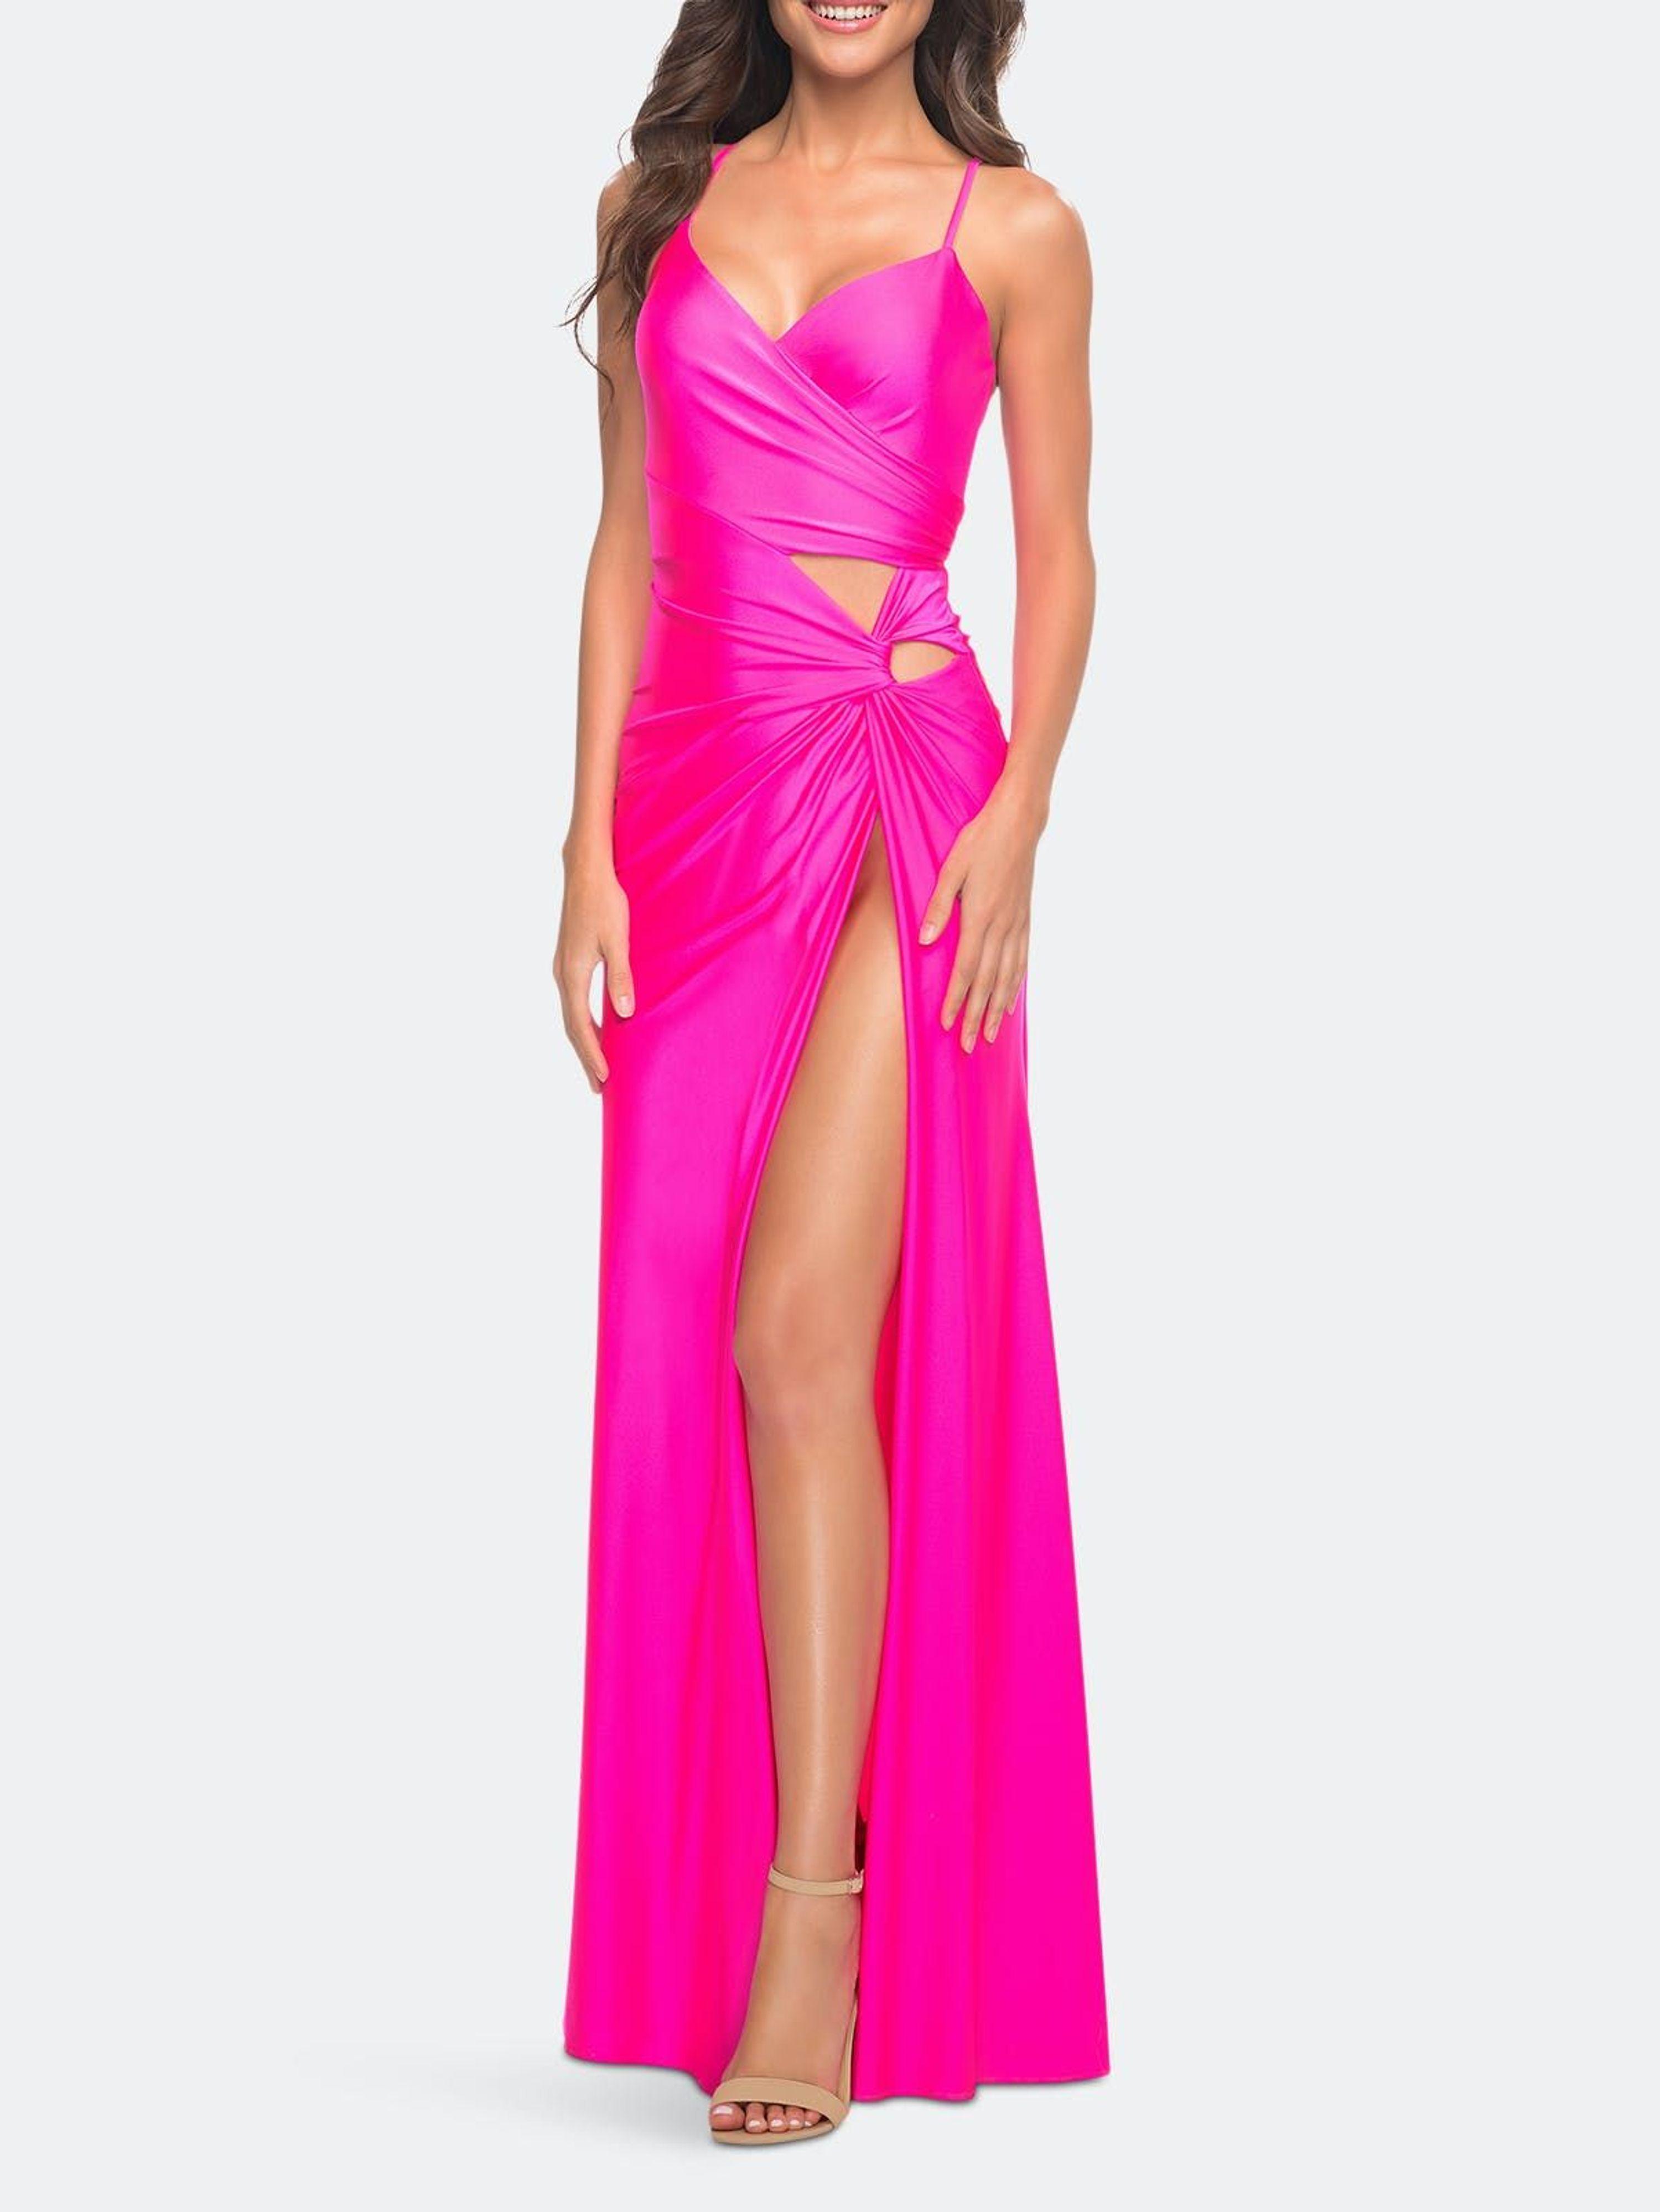 La Femme Neon Prom Dress With Cut Outs At Hip And High Slit in Pink | Lyst